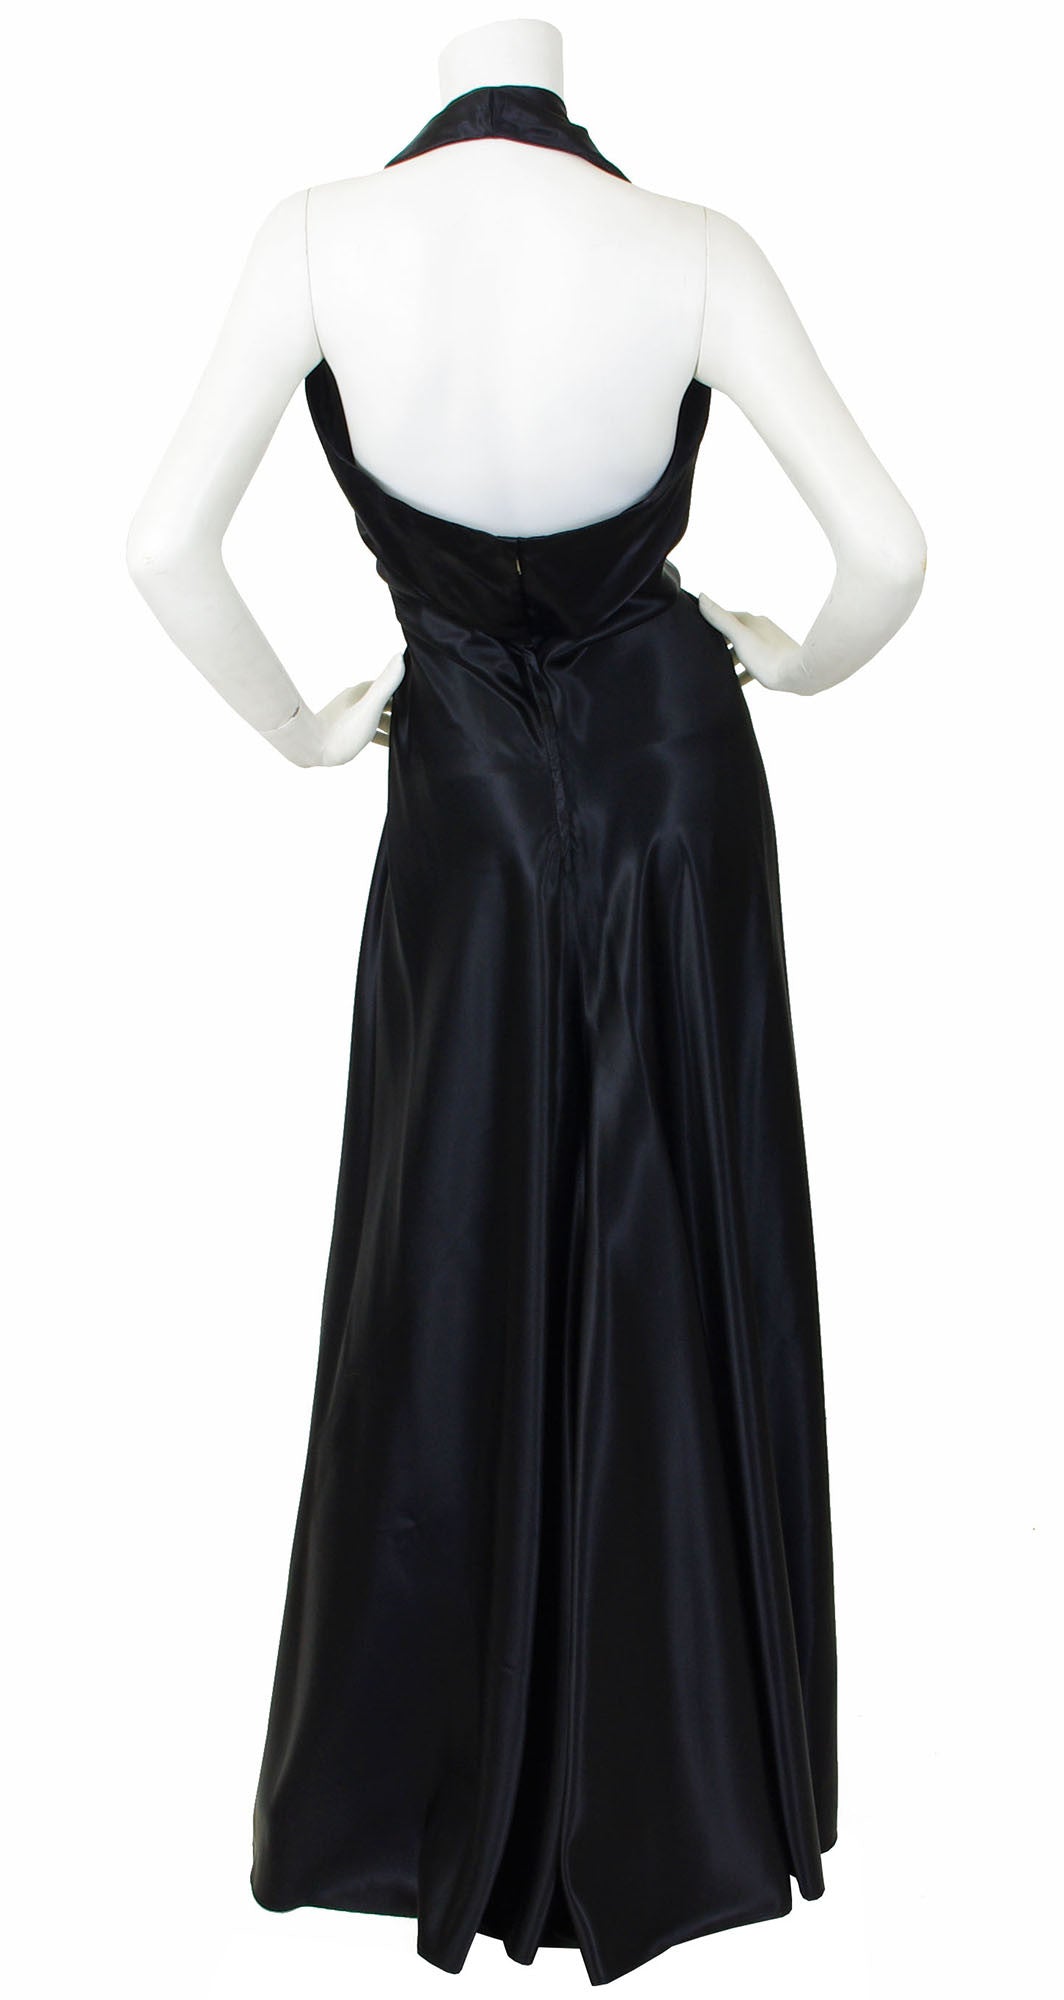 Satin Halter Gown With Feathers in Black Black